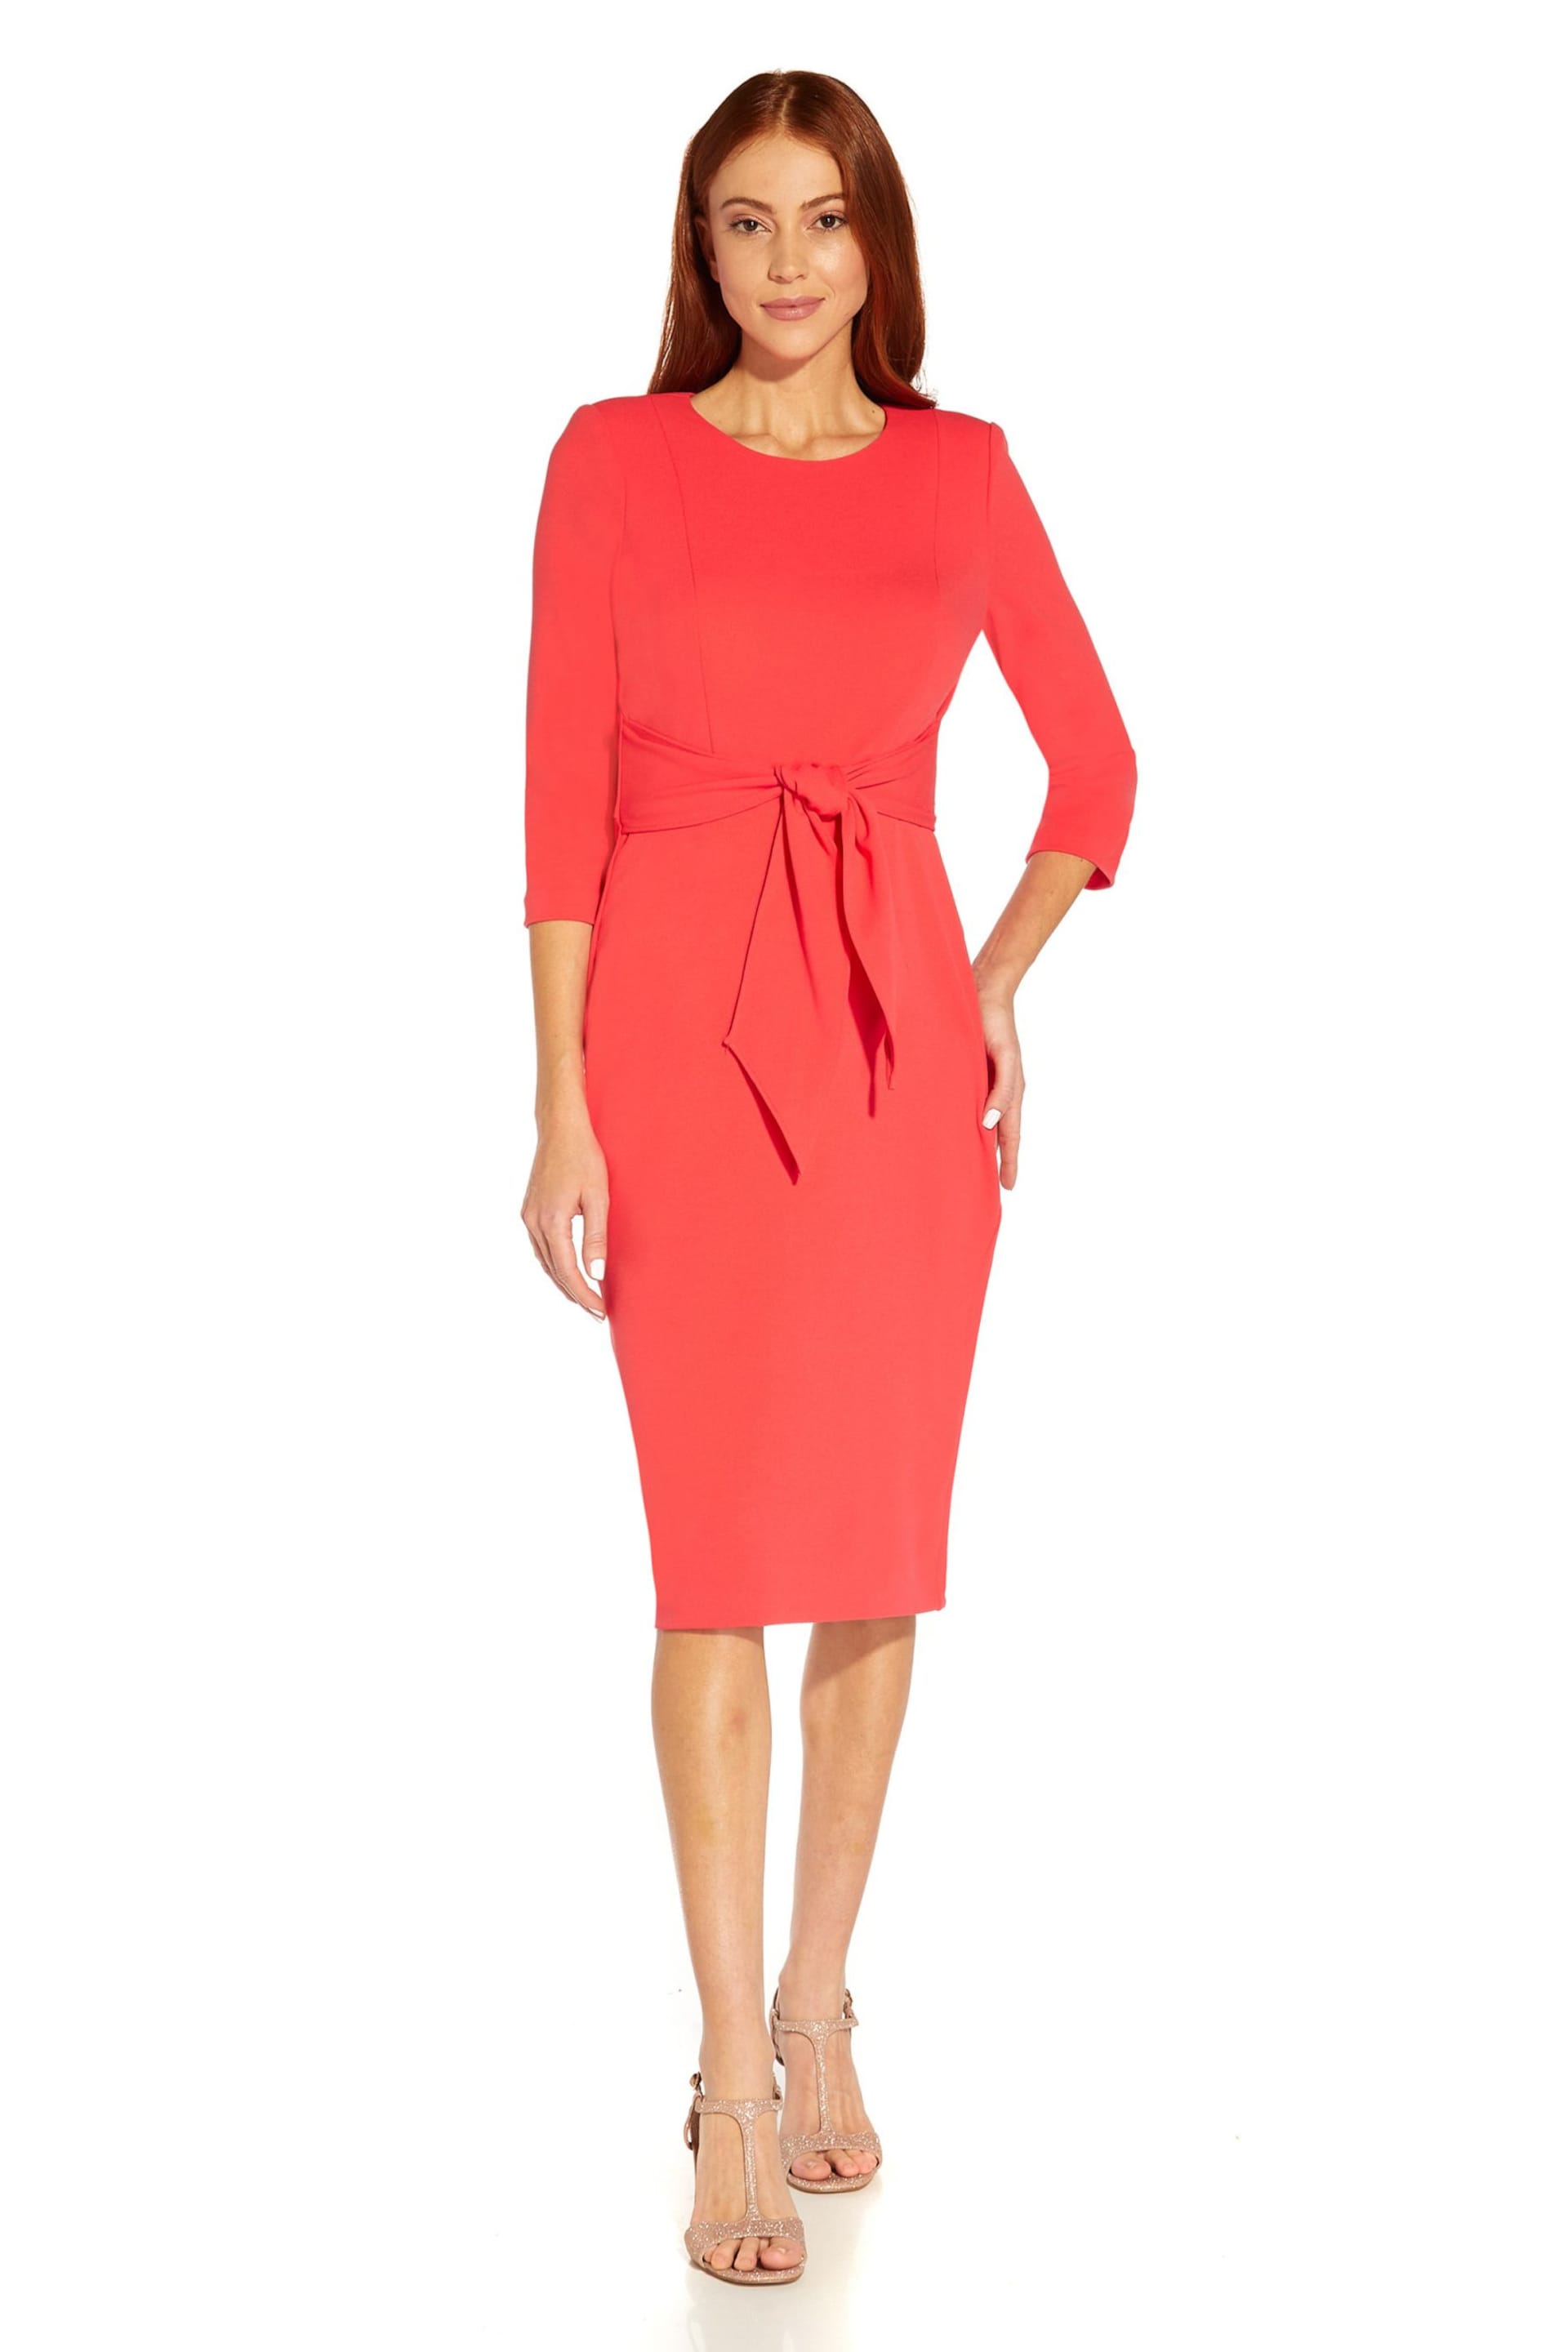 Adrianna Papell Red Knit Crepe Tie Waist Sheath Dress - Image 4 of 6